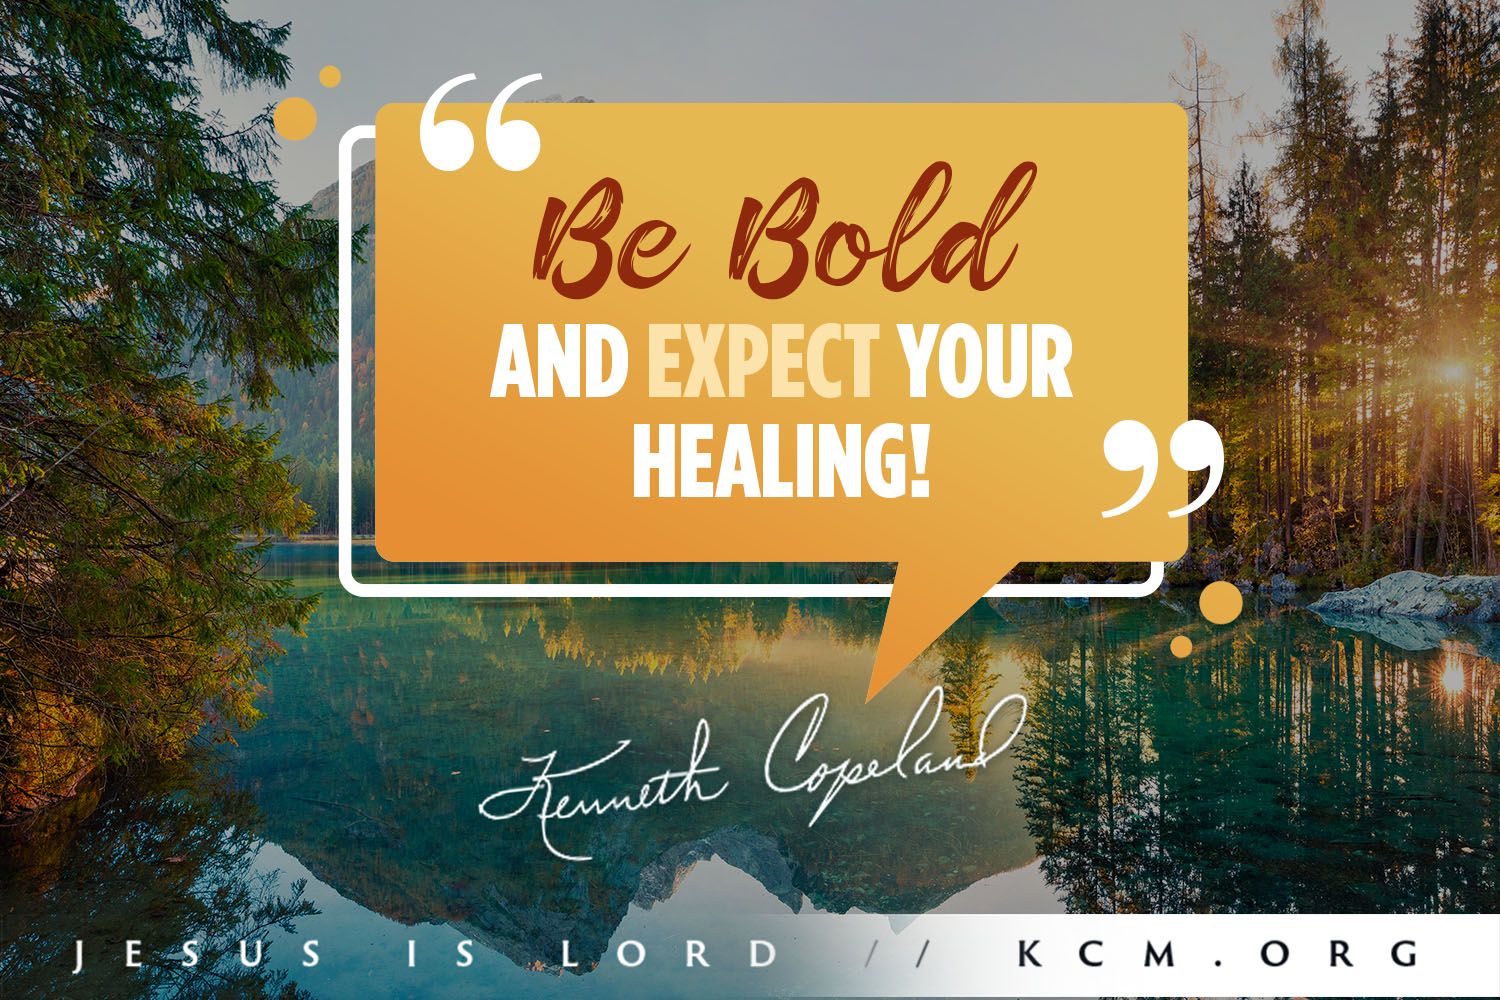 Be Bold and Expect Your Healing! By Kenneth Copeland